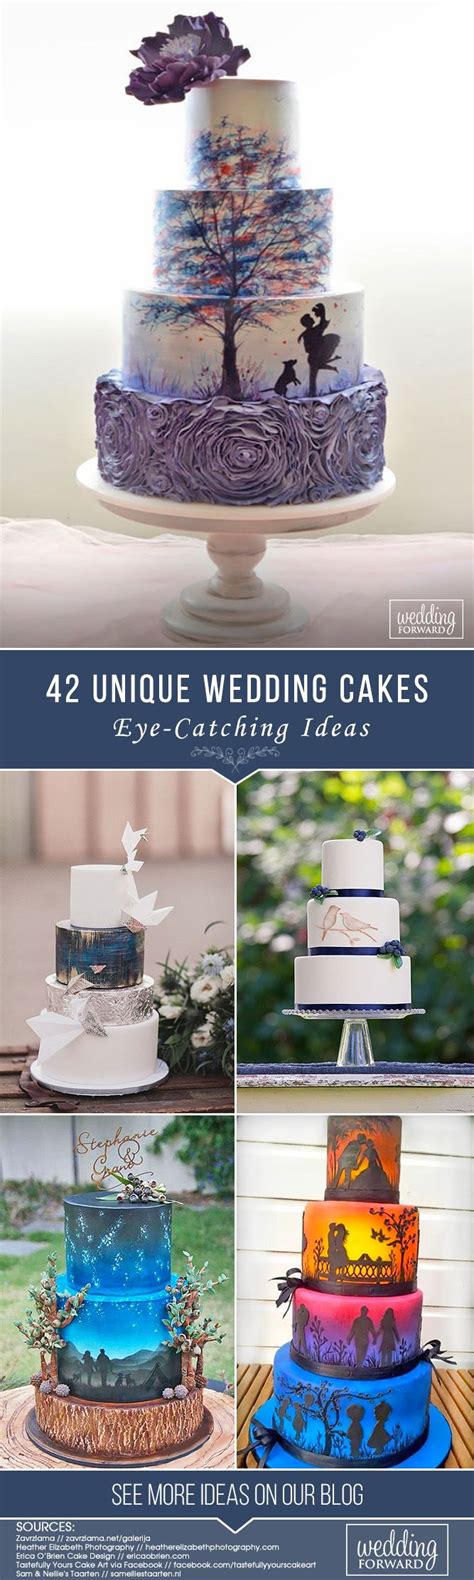 get inspired with unique and eye catching wedding cakes wedding cakes wedding themes rustic